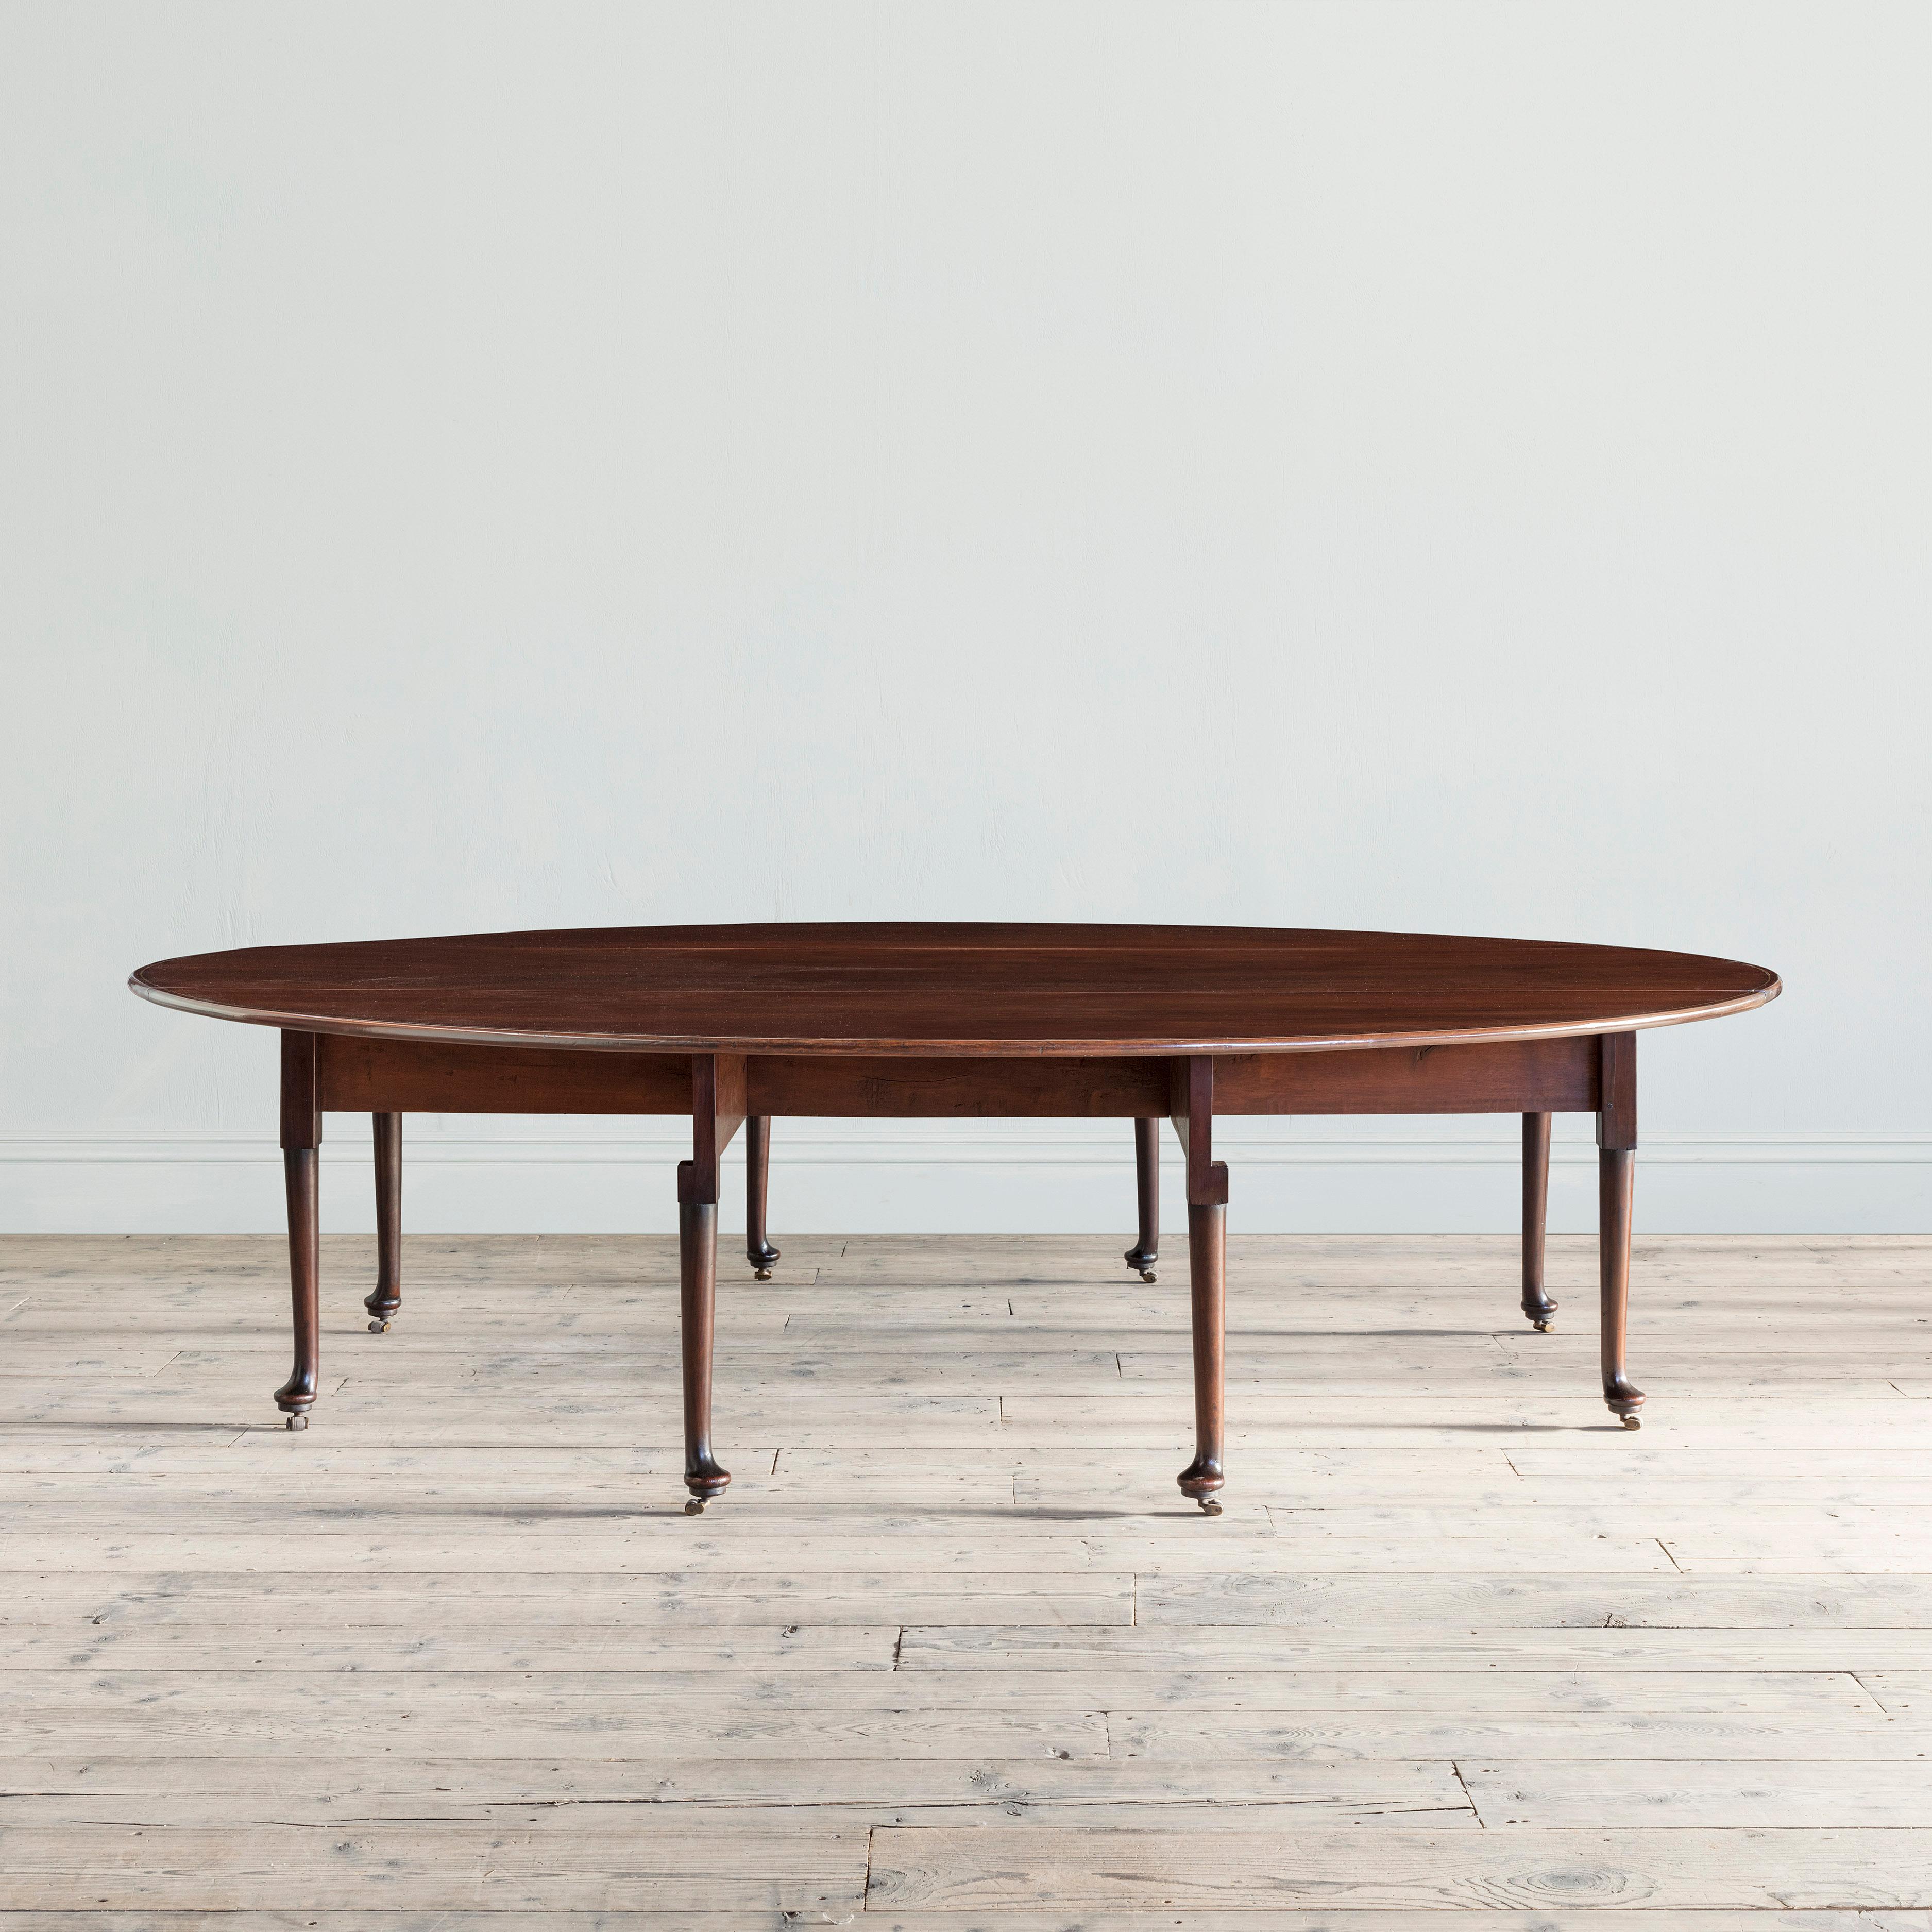 An extraordinary scale George II mahogany and brass strung drop-leaf table
The oval top supported on turned and tapering legs and pad feet, the eight legs terminating in brass and leather casters.

Unusual for its magnificent scale and